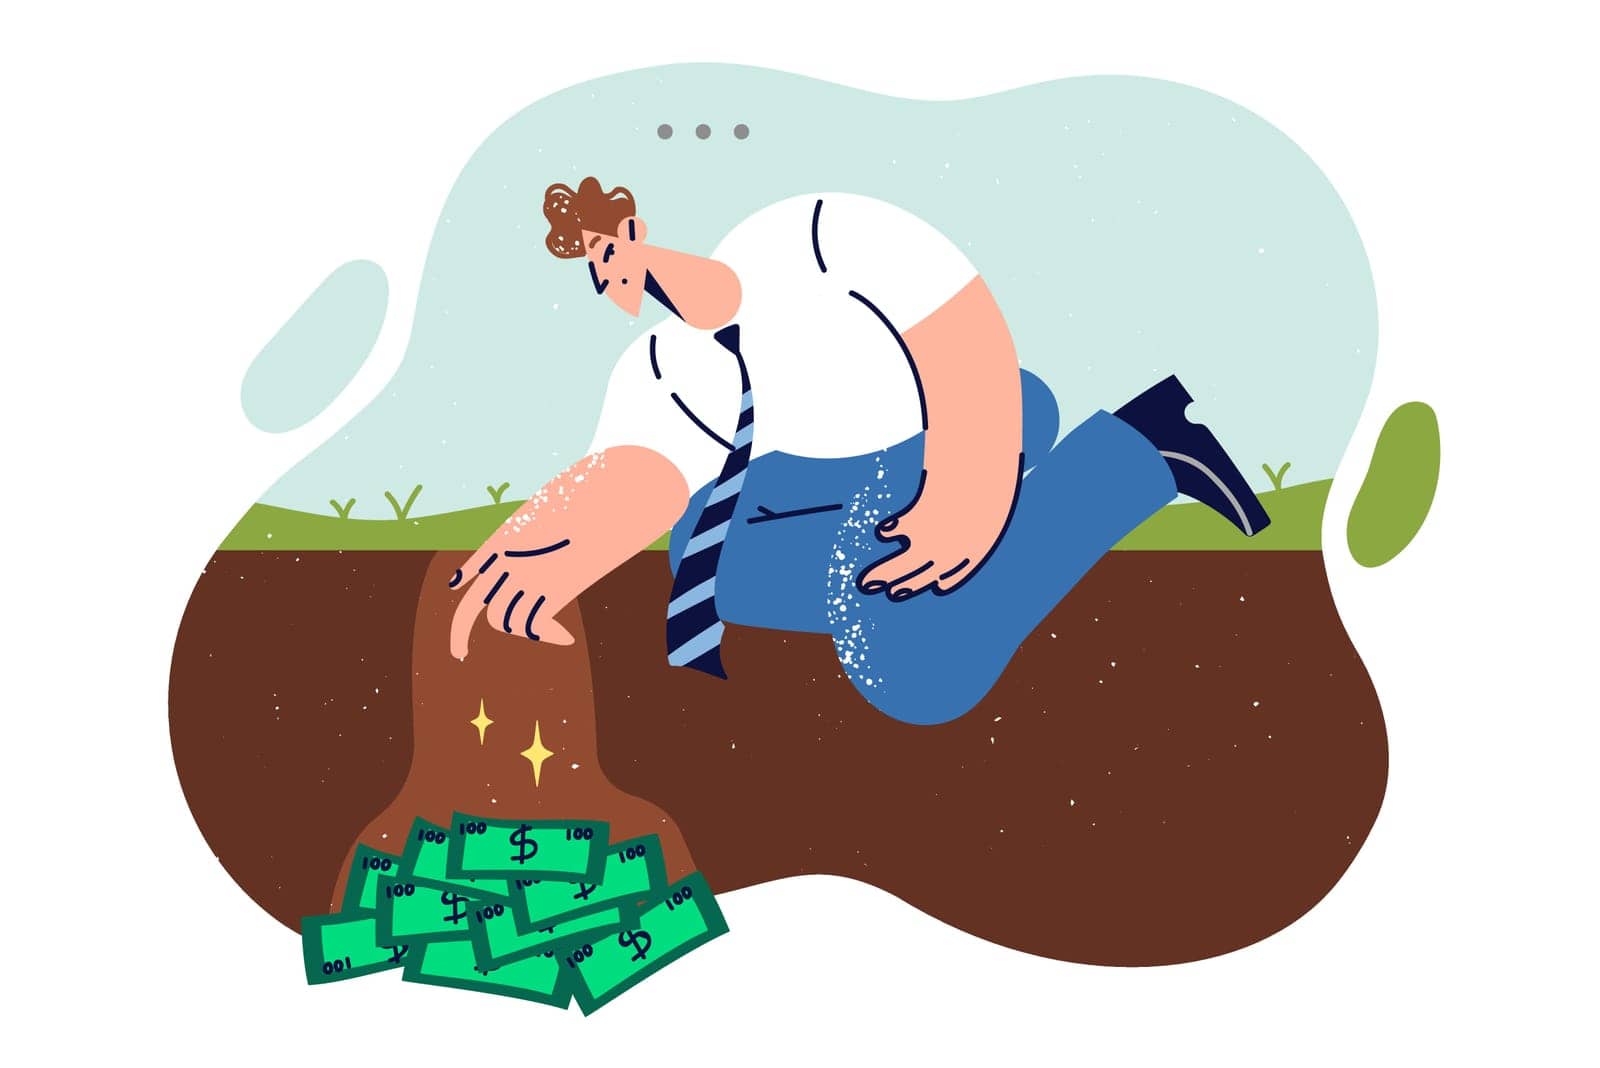 Man digs money out of ground after finding valuable cache of cash during random walk. Guy is burying money due to lack of trust in banks and investments or other financial institutions